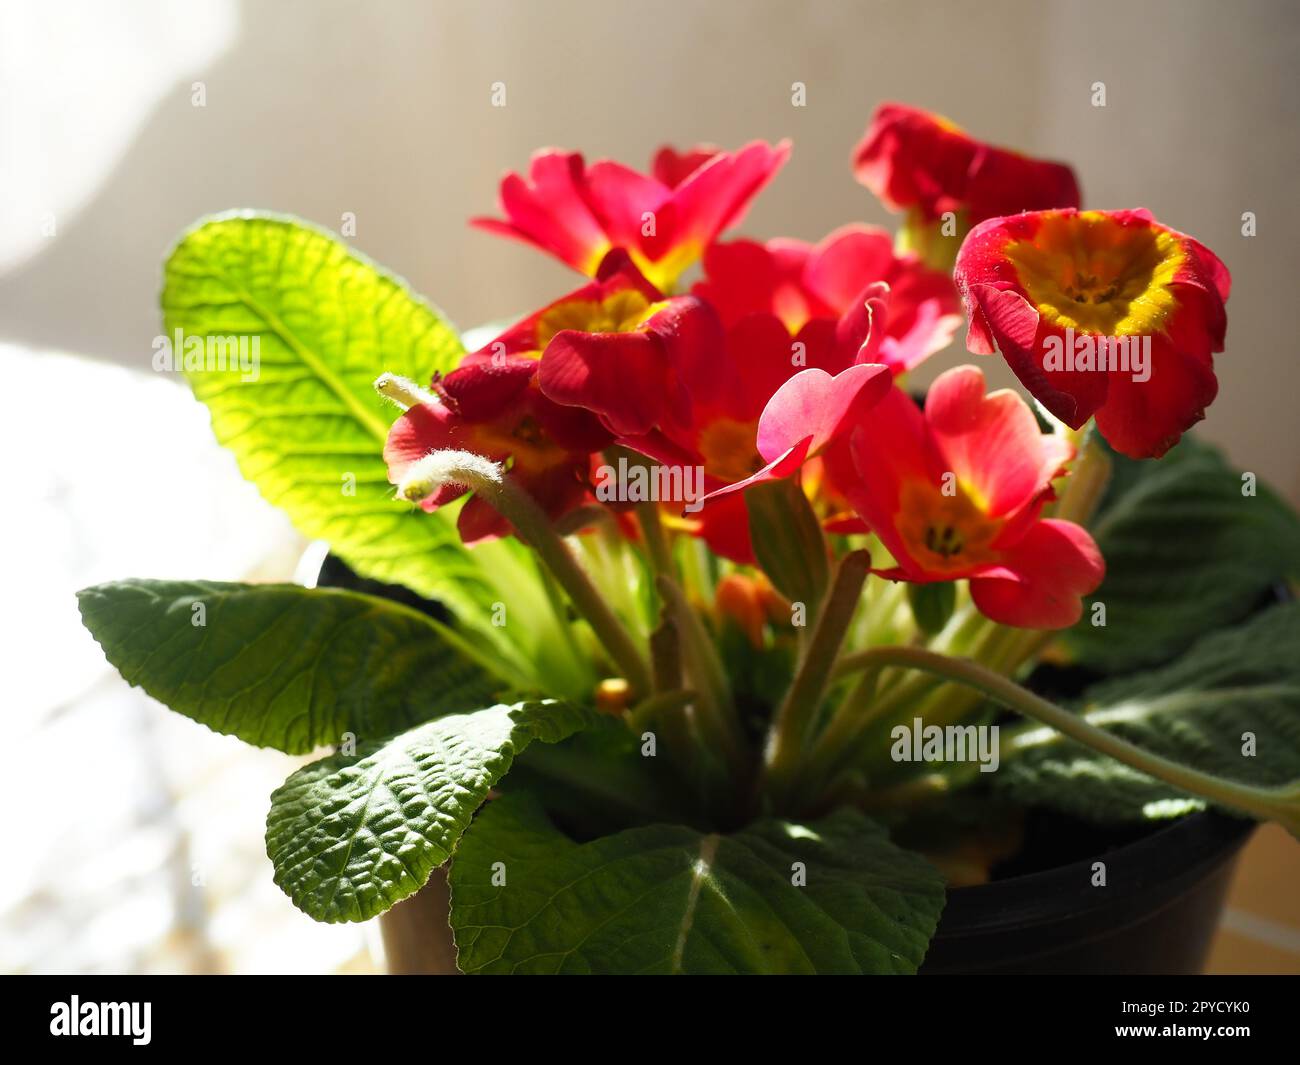 Primula, a genus of plants from the Primulaceae family of the Ericales order. Indoor floriculture as a hobby. Red bright flower with a yellow center. Lateral plan in the counterlight from the window. Stock Photo